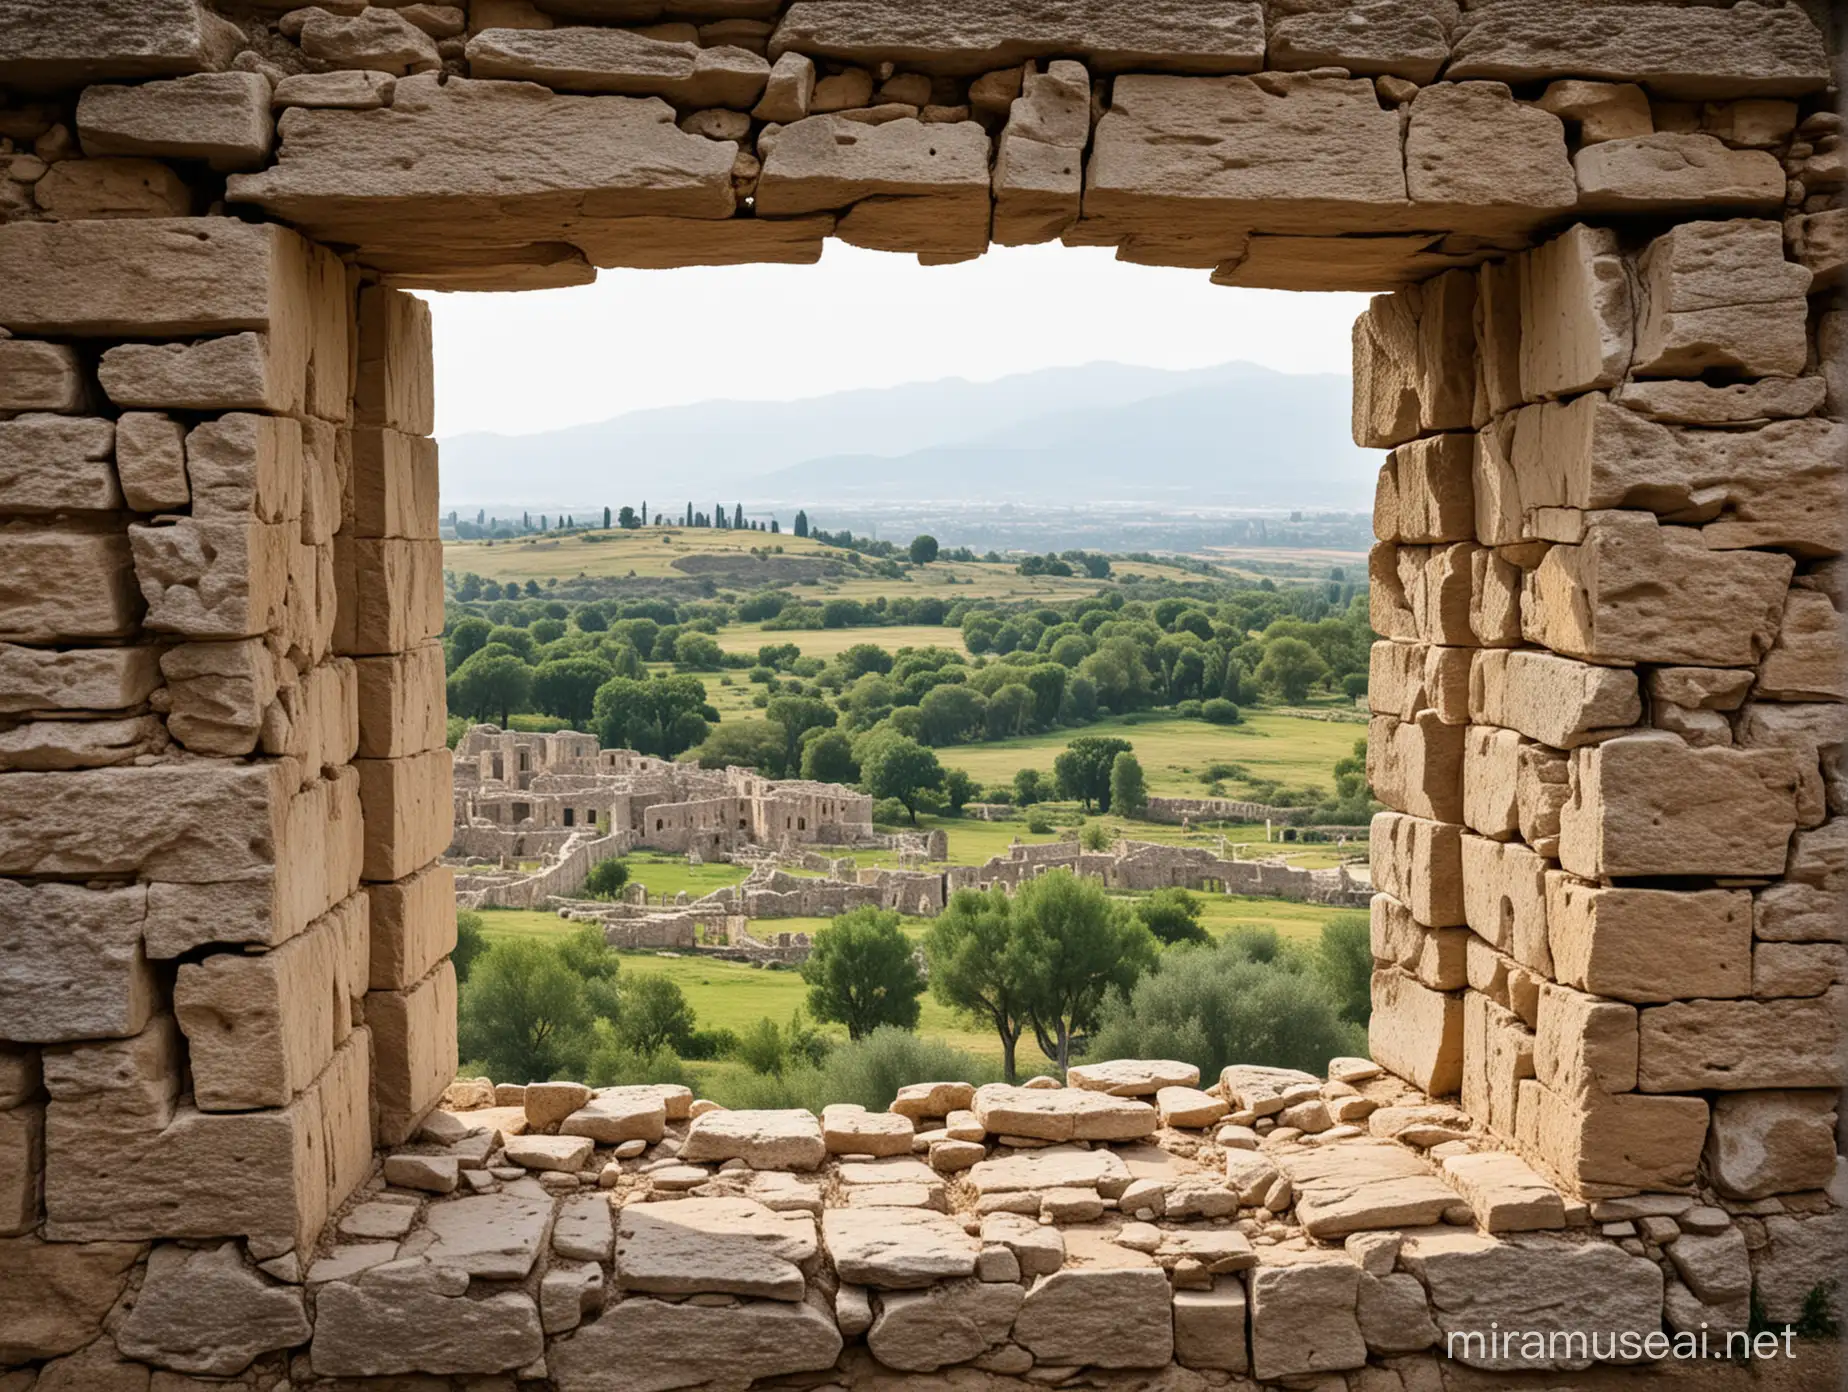 Looking out of an ancient Roman villa window Approx 2000 BC made of stone cracked and crumbling A very biblical landscaped view beyond